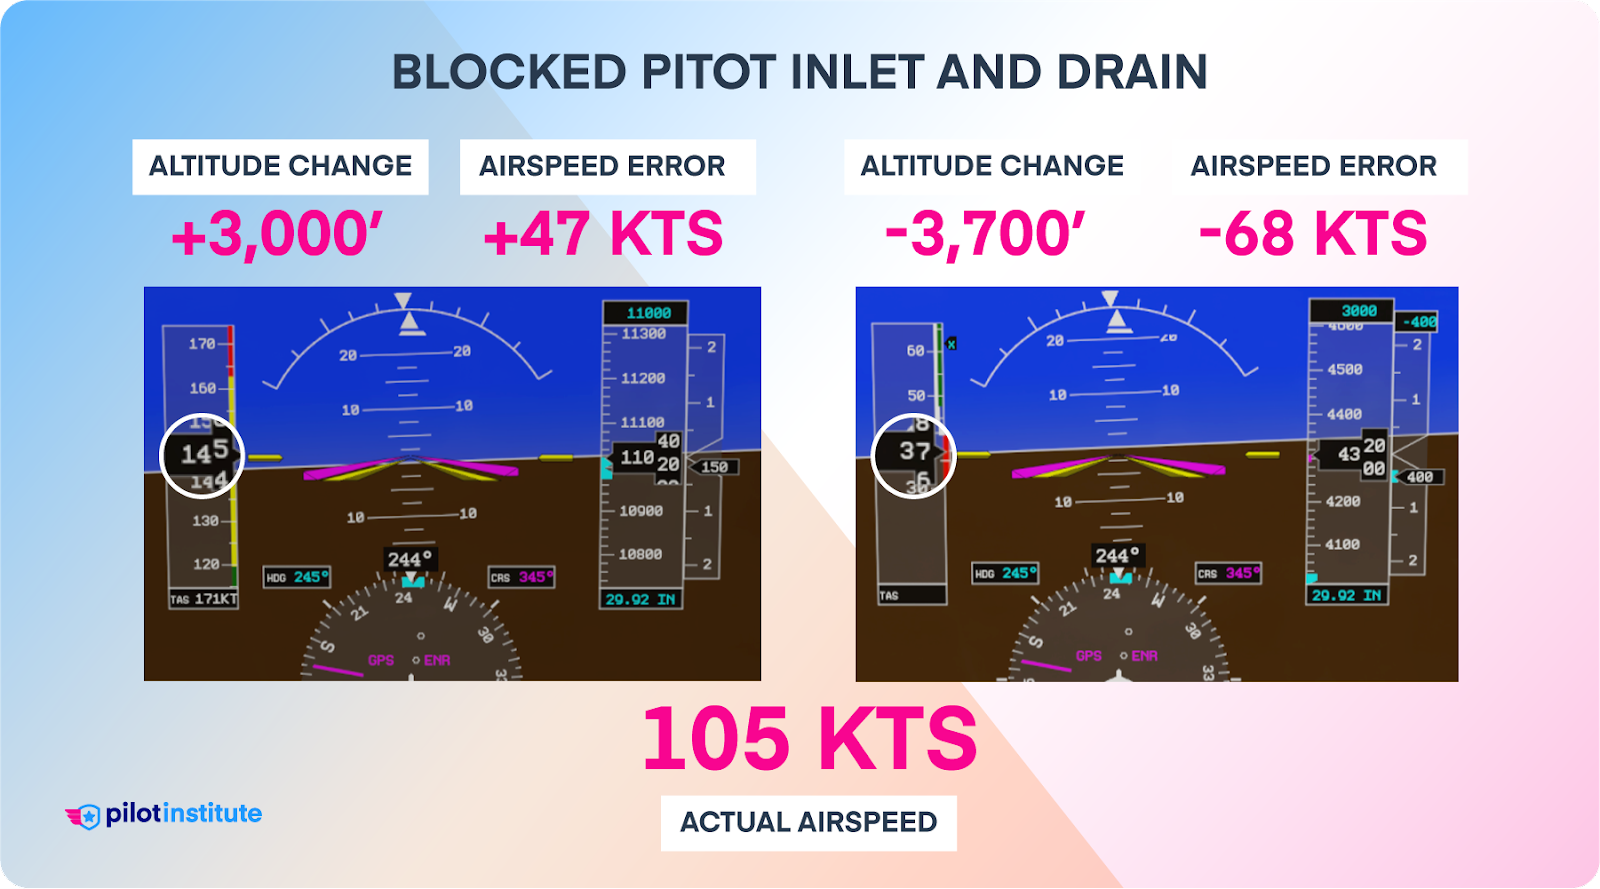 Infographic depicting how changes in altitude affect the ASI when the pitot inlet and drain are blocked.